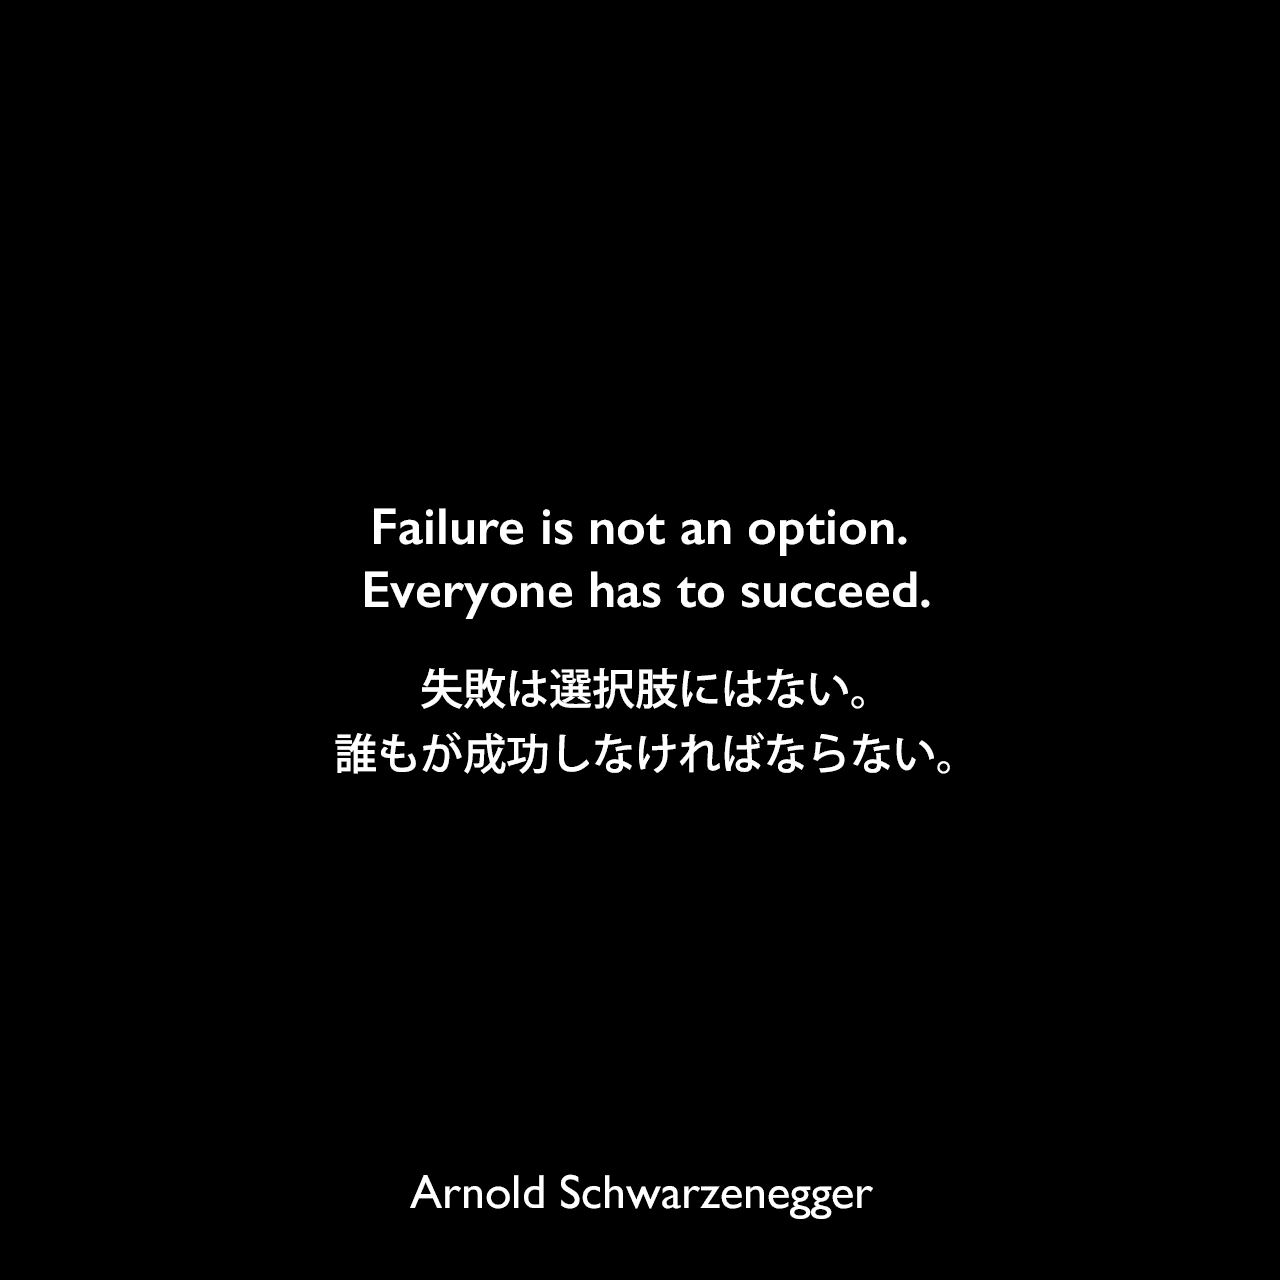 Failure is not an option. Everyone has to succeed.失敗は選択肢にはない。誰もが成功しなければならない。